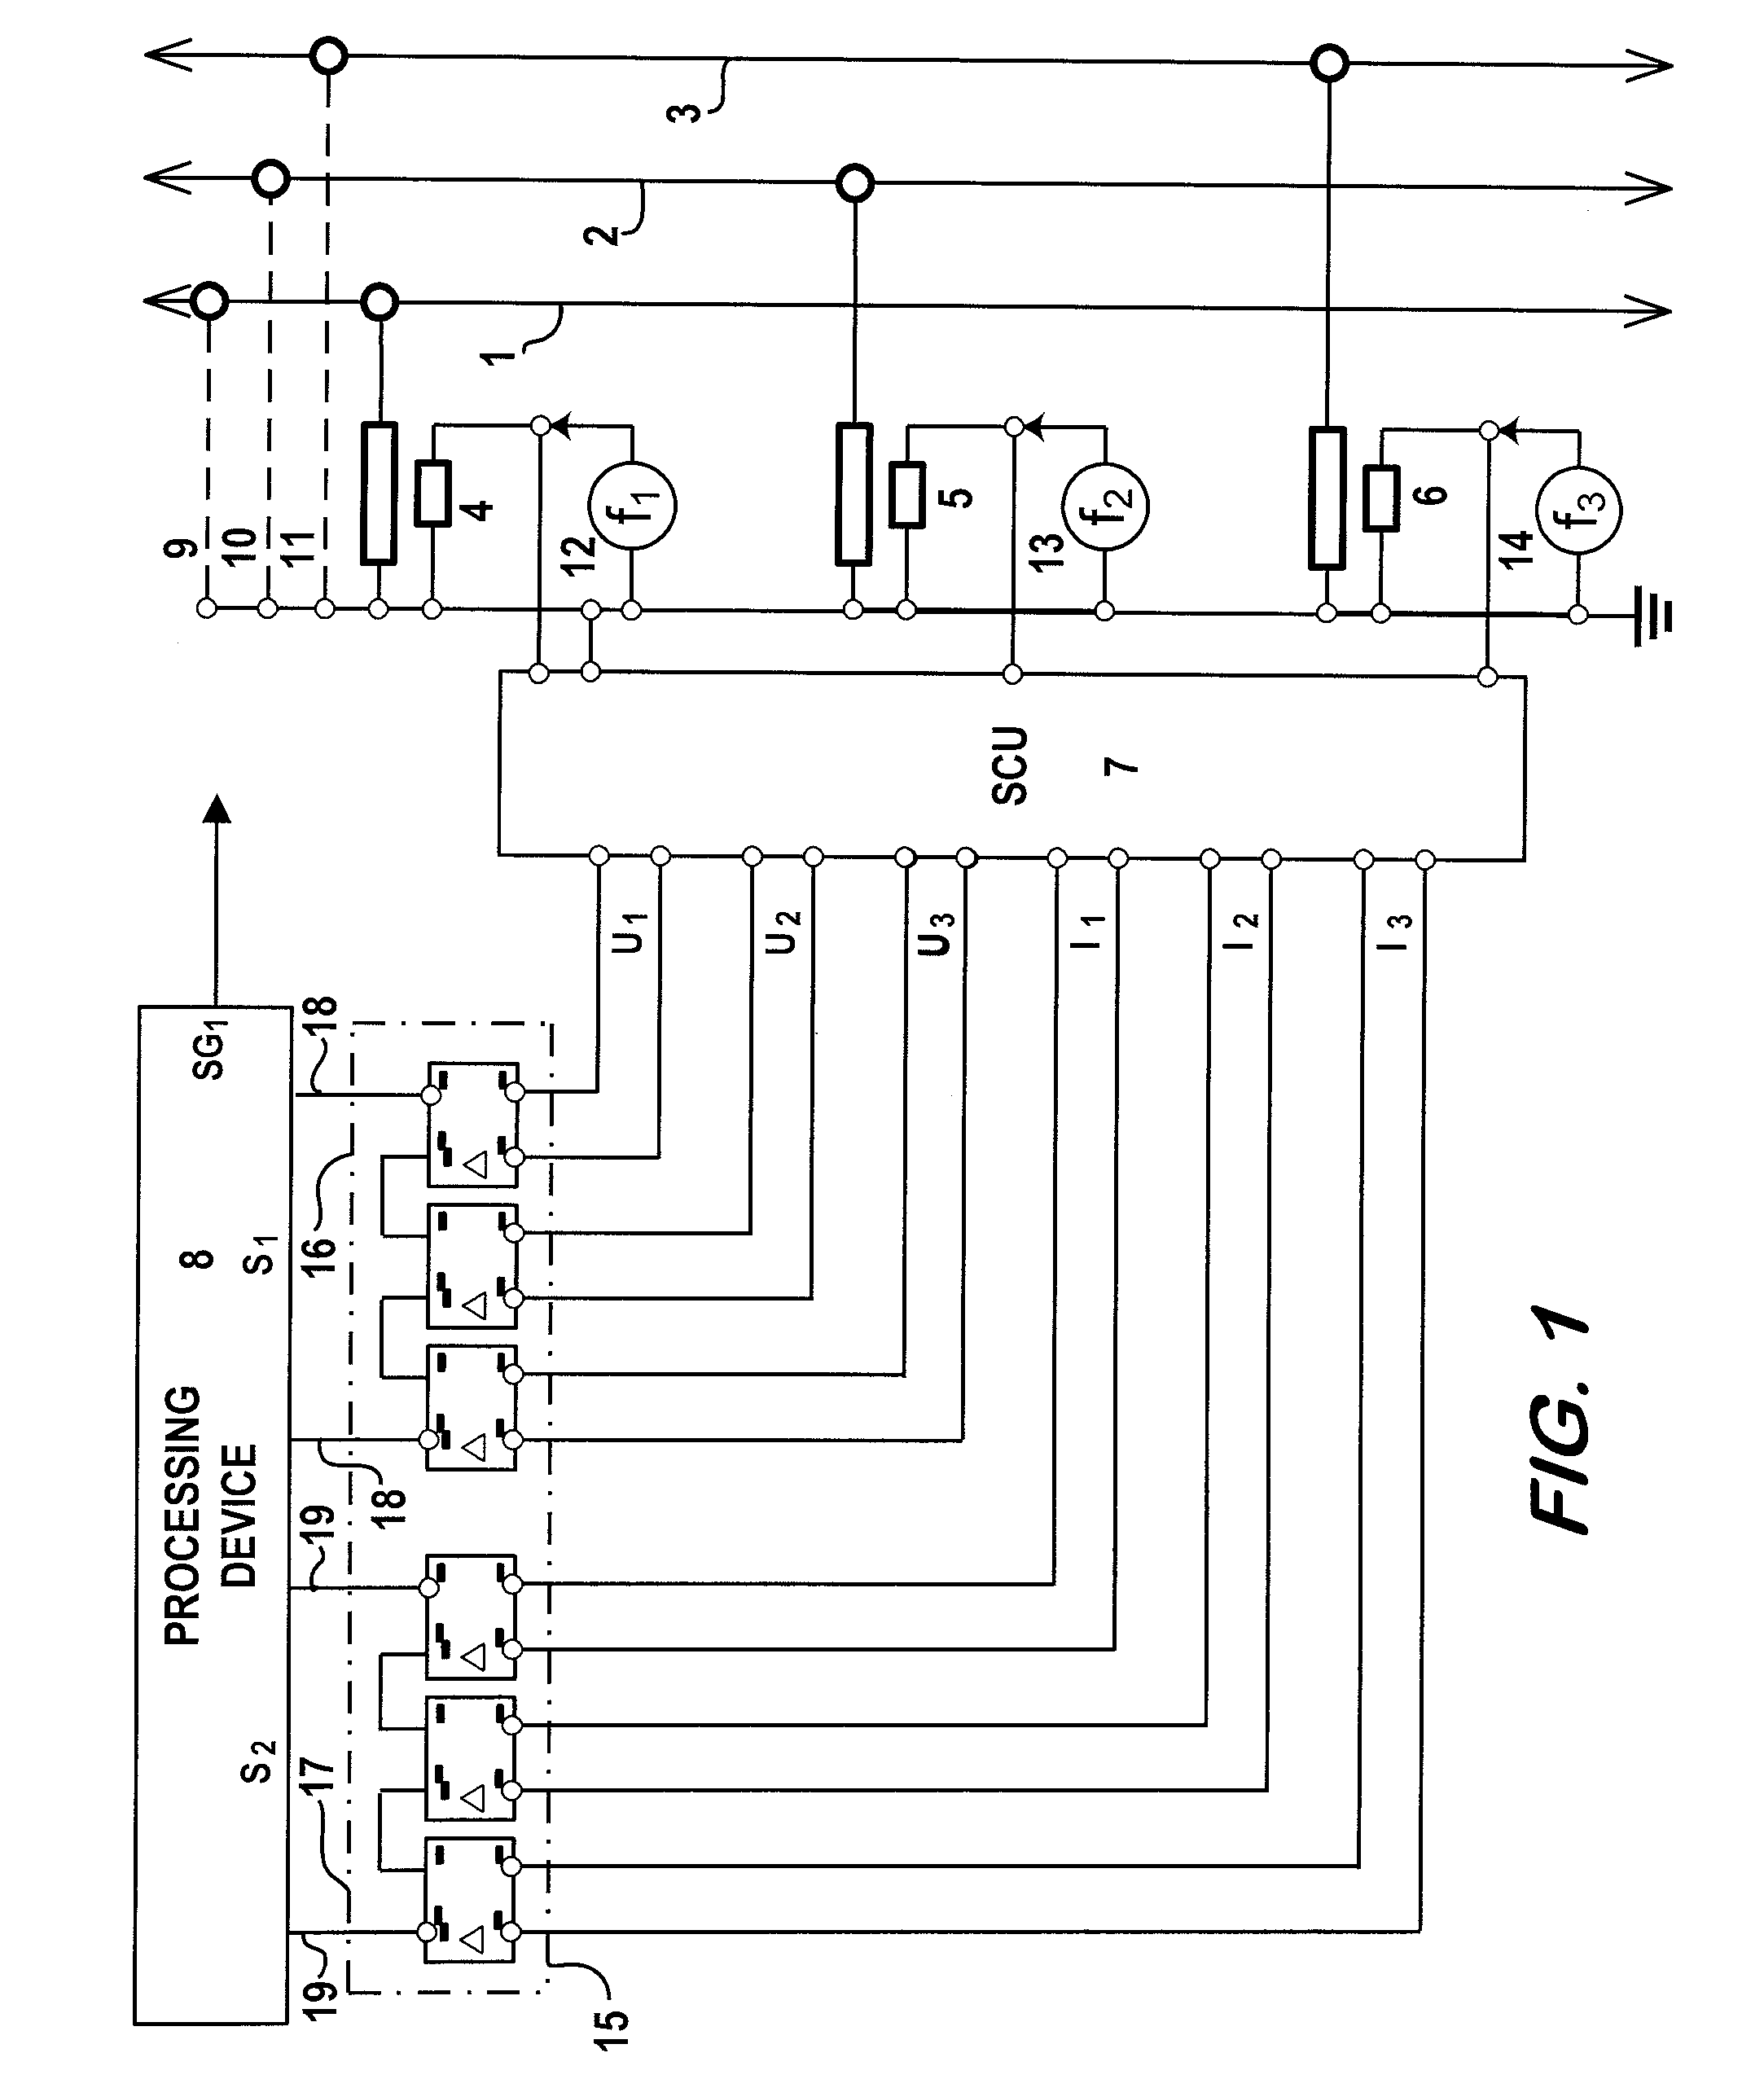 System And Method To Determine The Impedance Of A Disconnected Electrical Facility